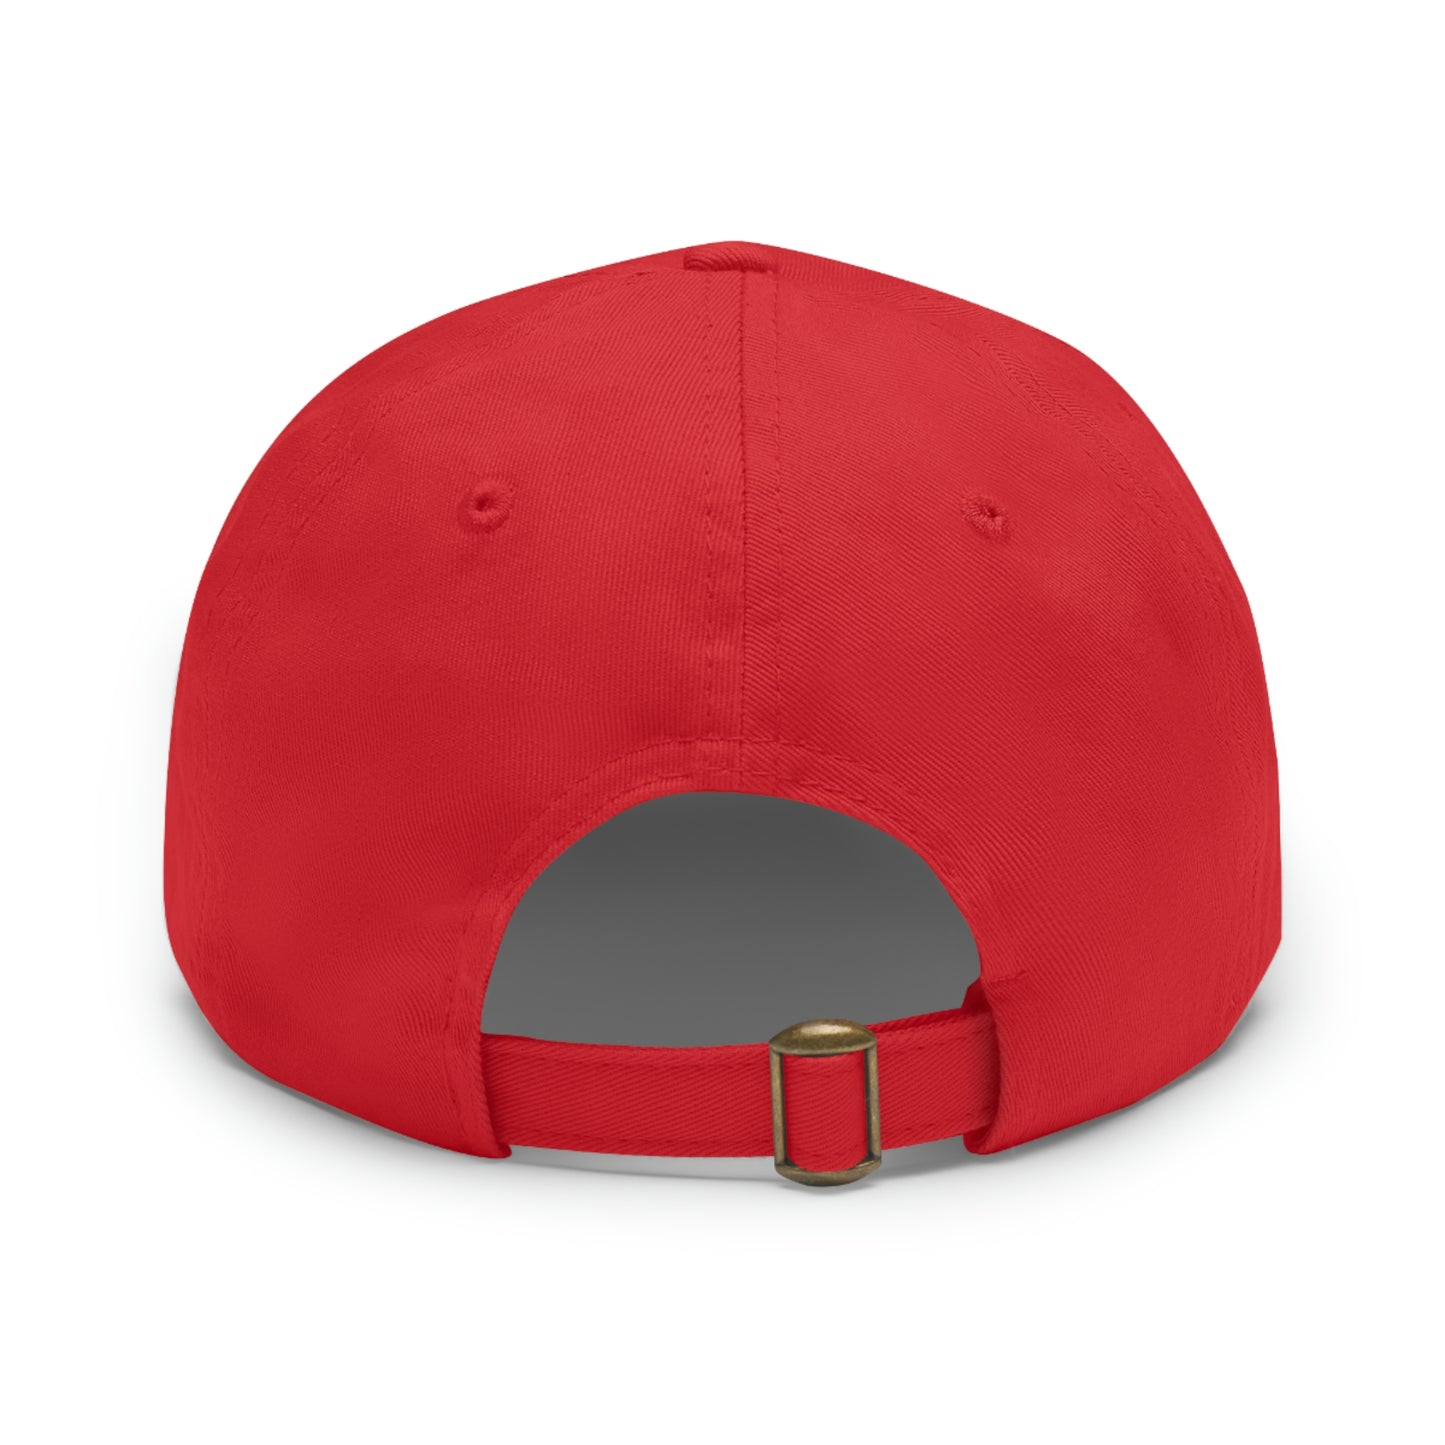 Hat with Leather Patch - Adidas